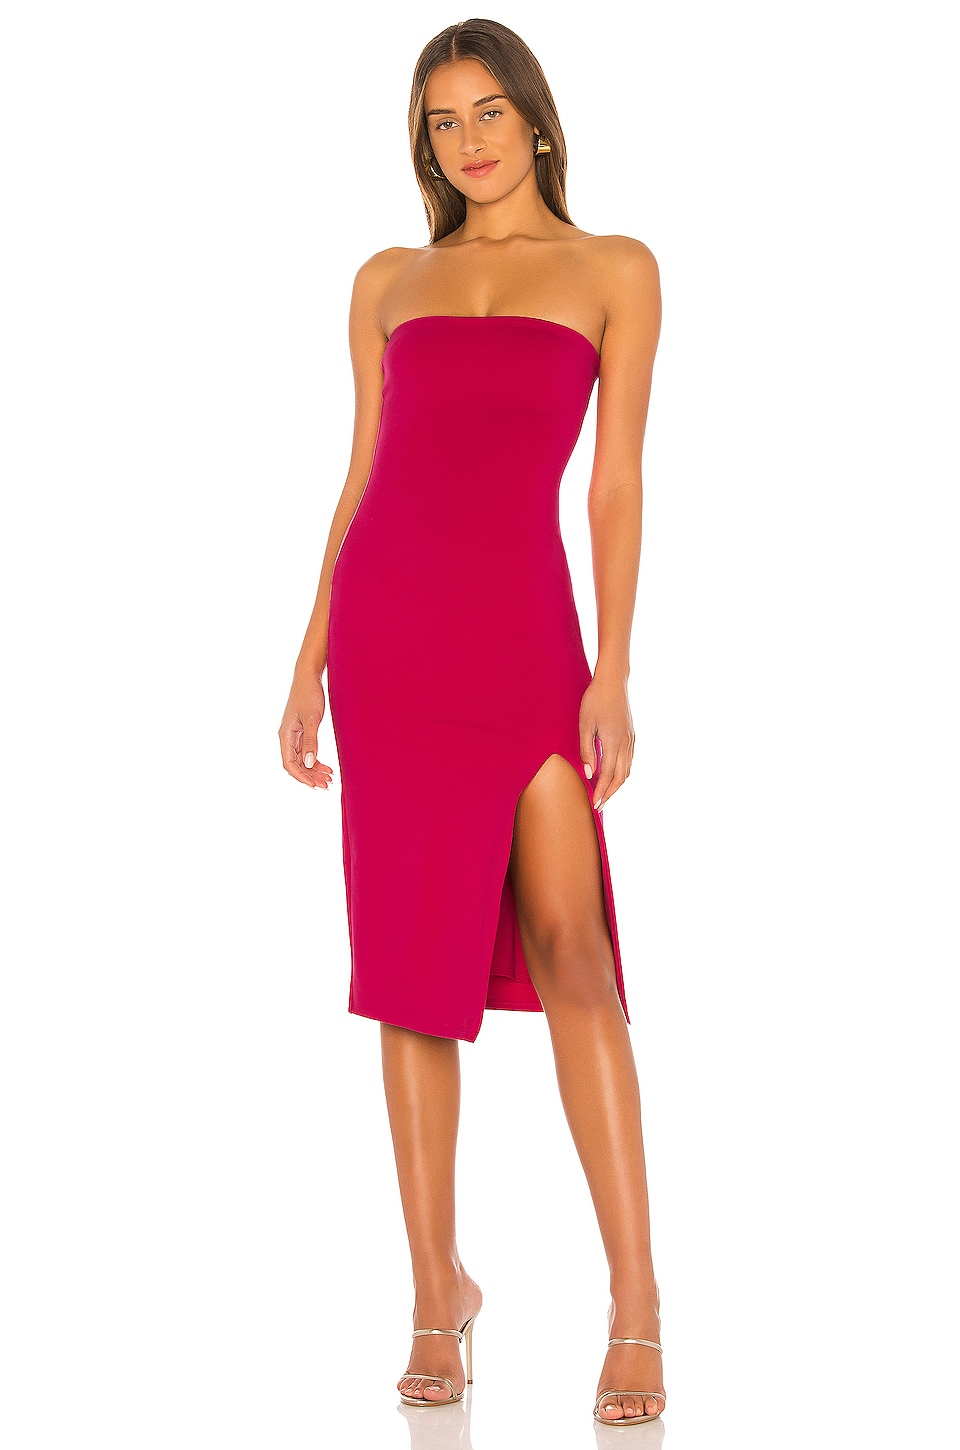 Lovers & Friends Jayma Midi Dress In Hibiscus Pink